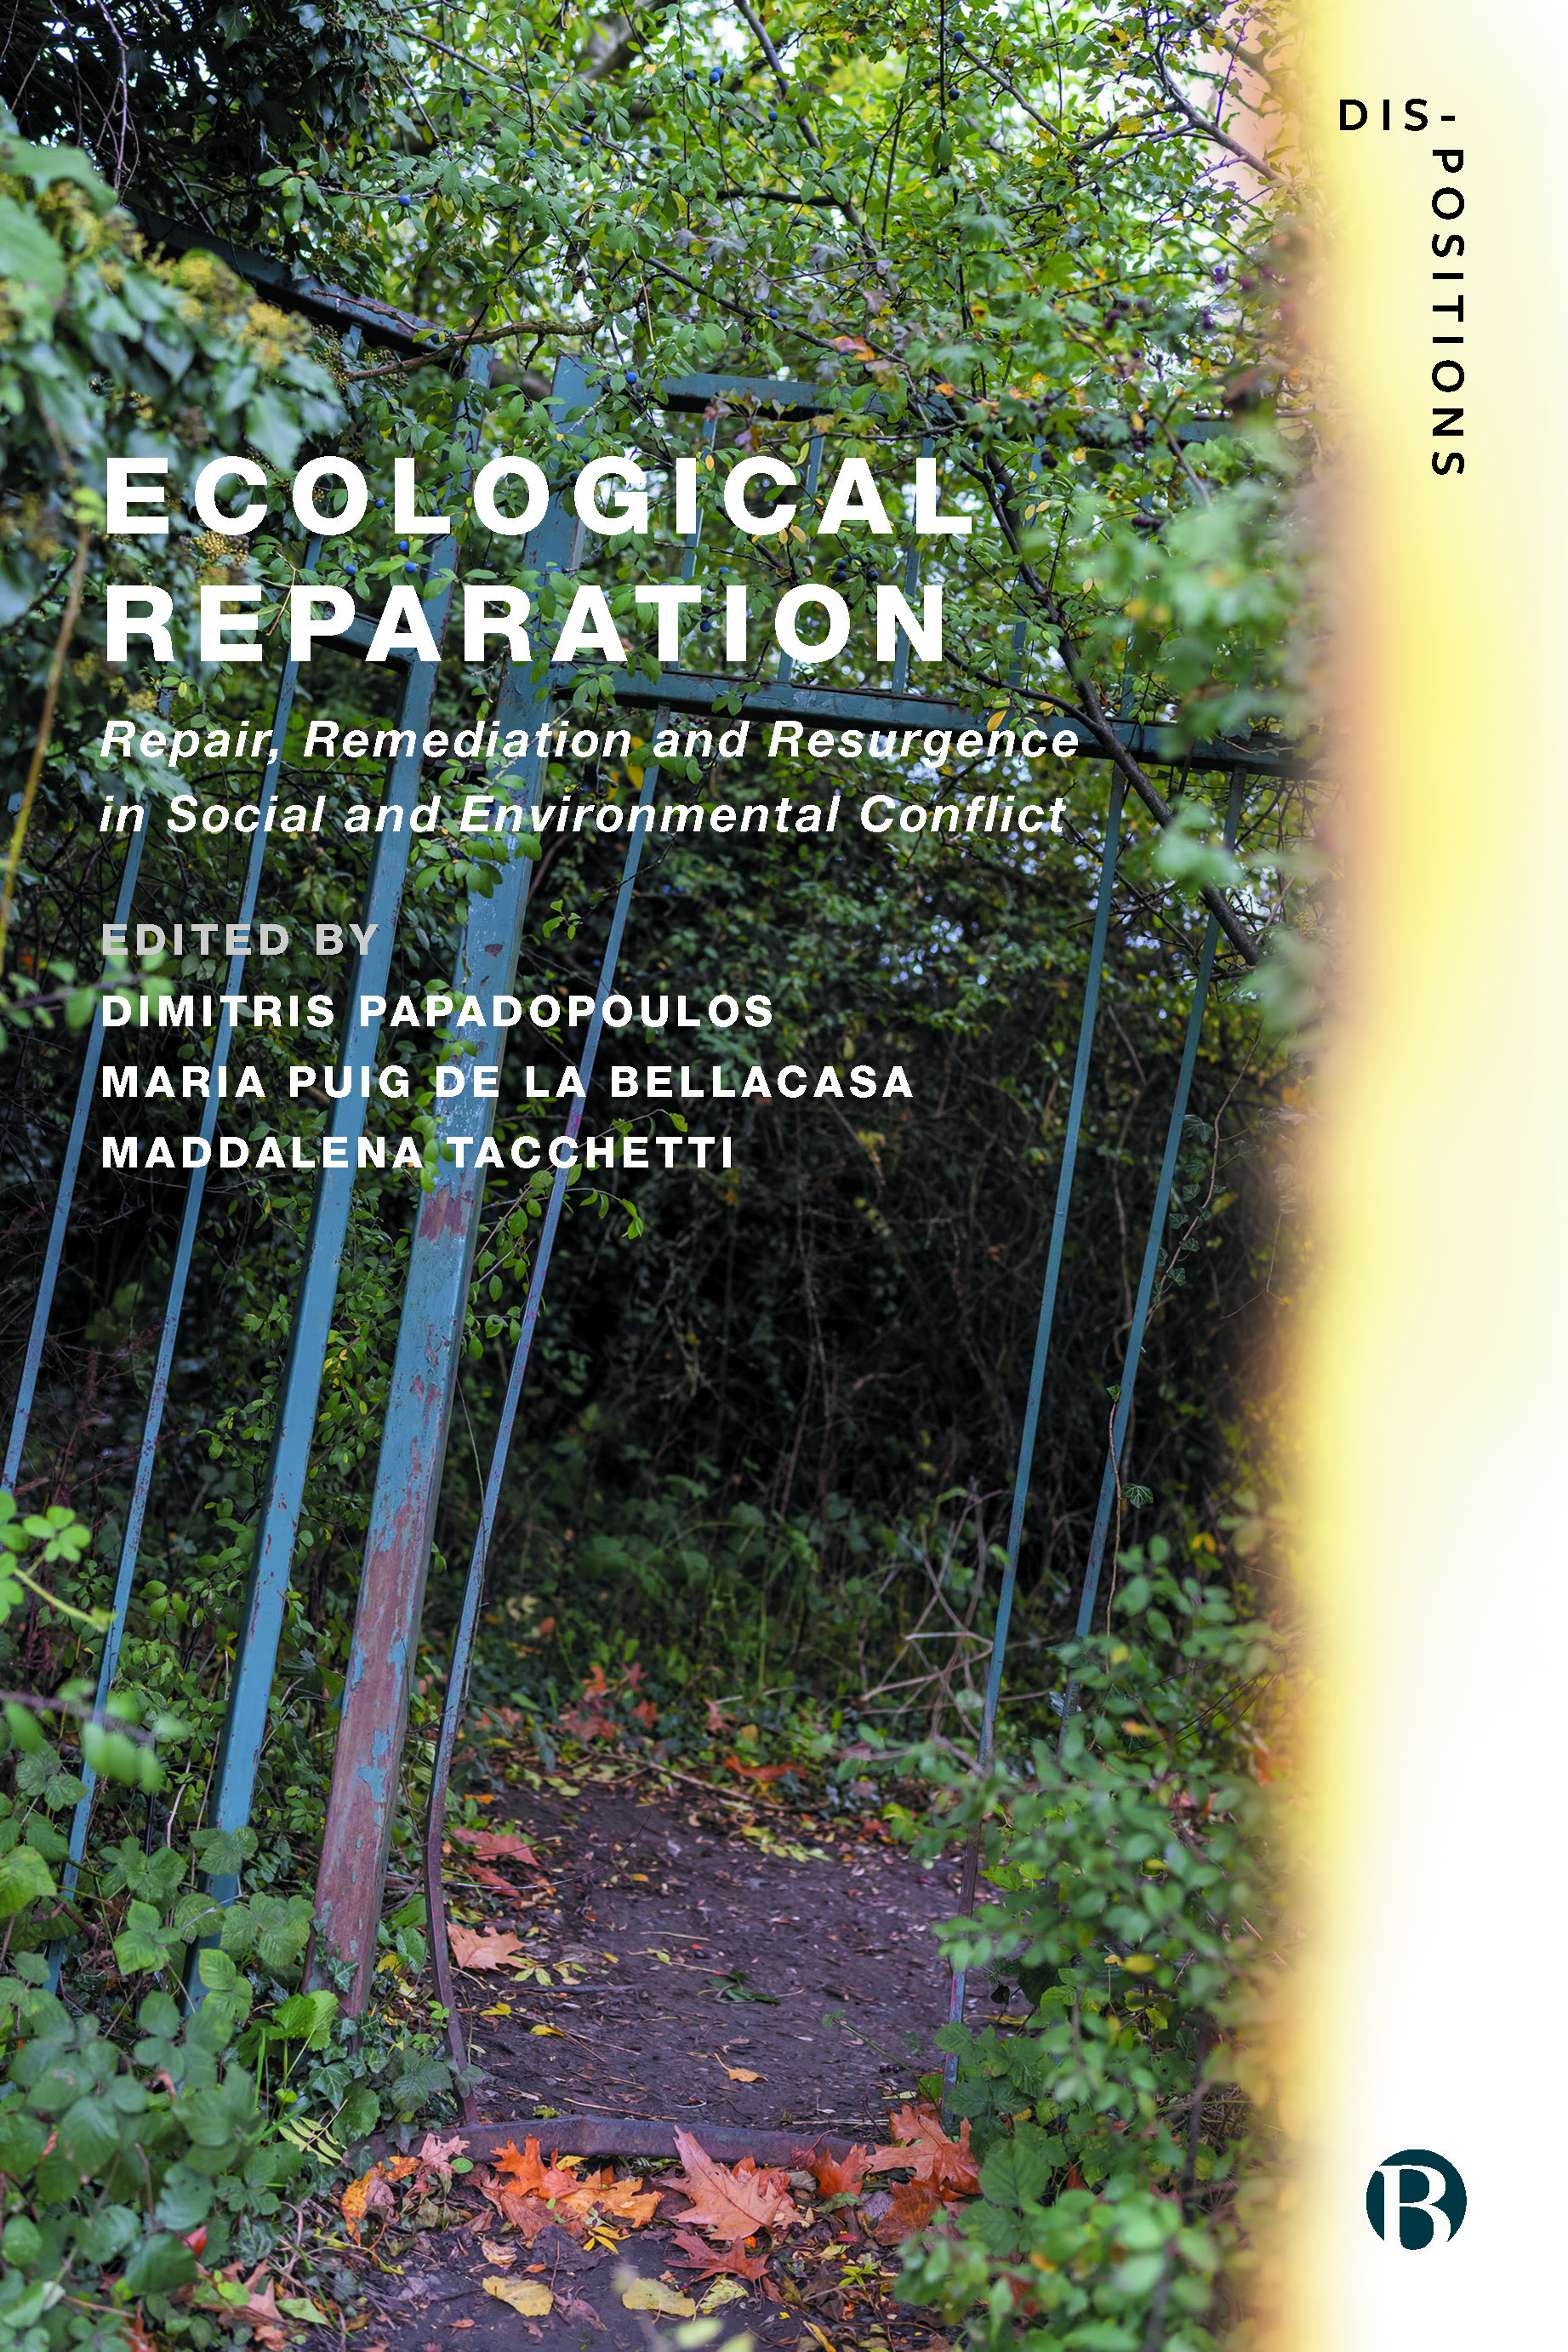 ecological-reparation-fc.jpg